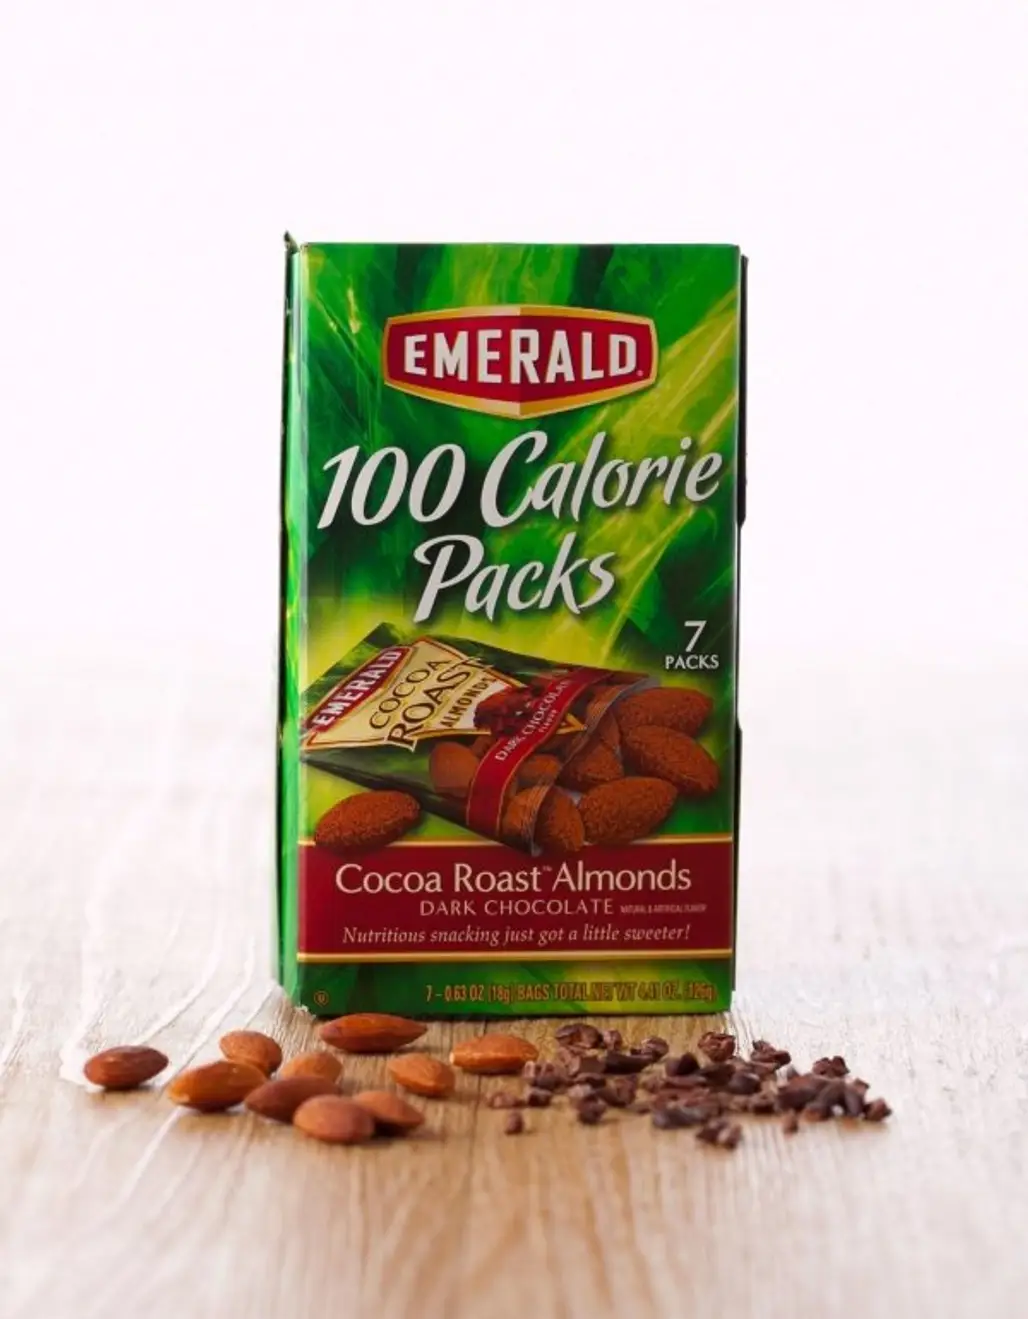 100 Calorie Packs of Almonds